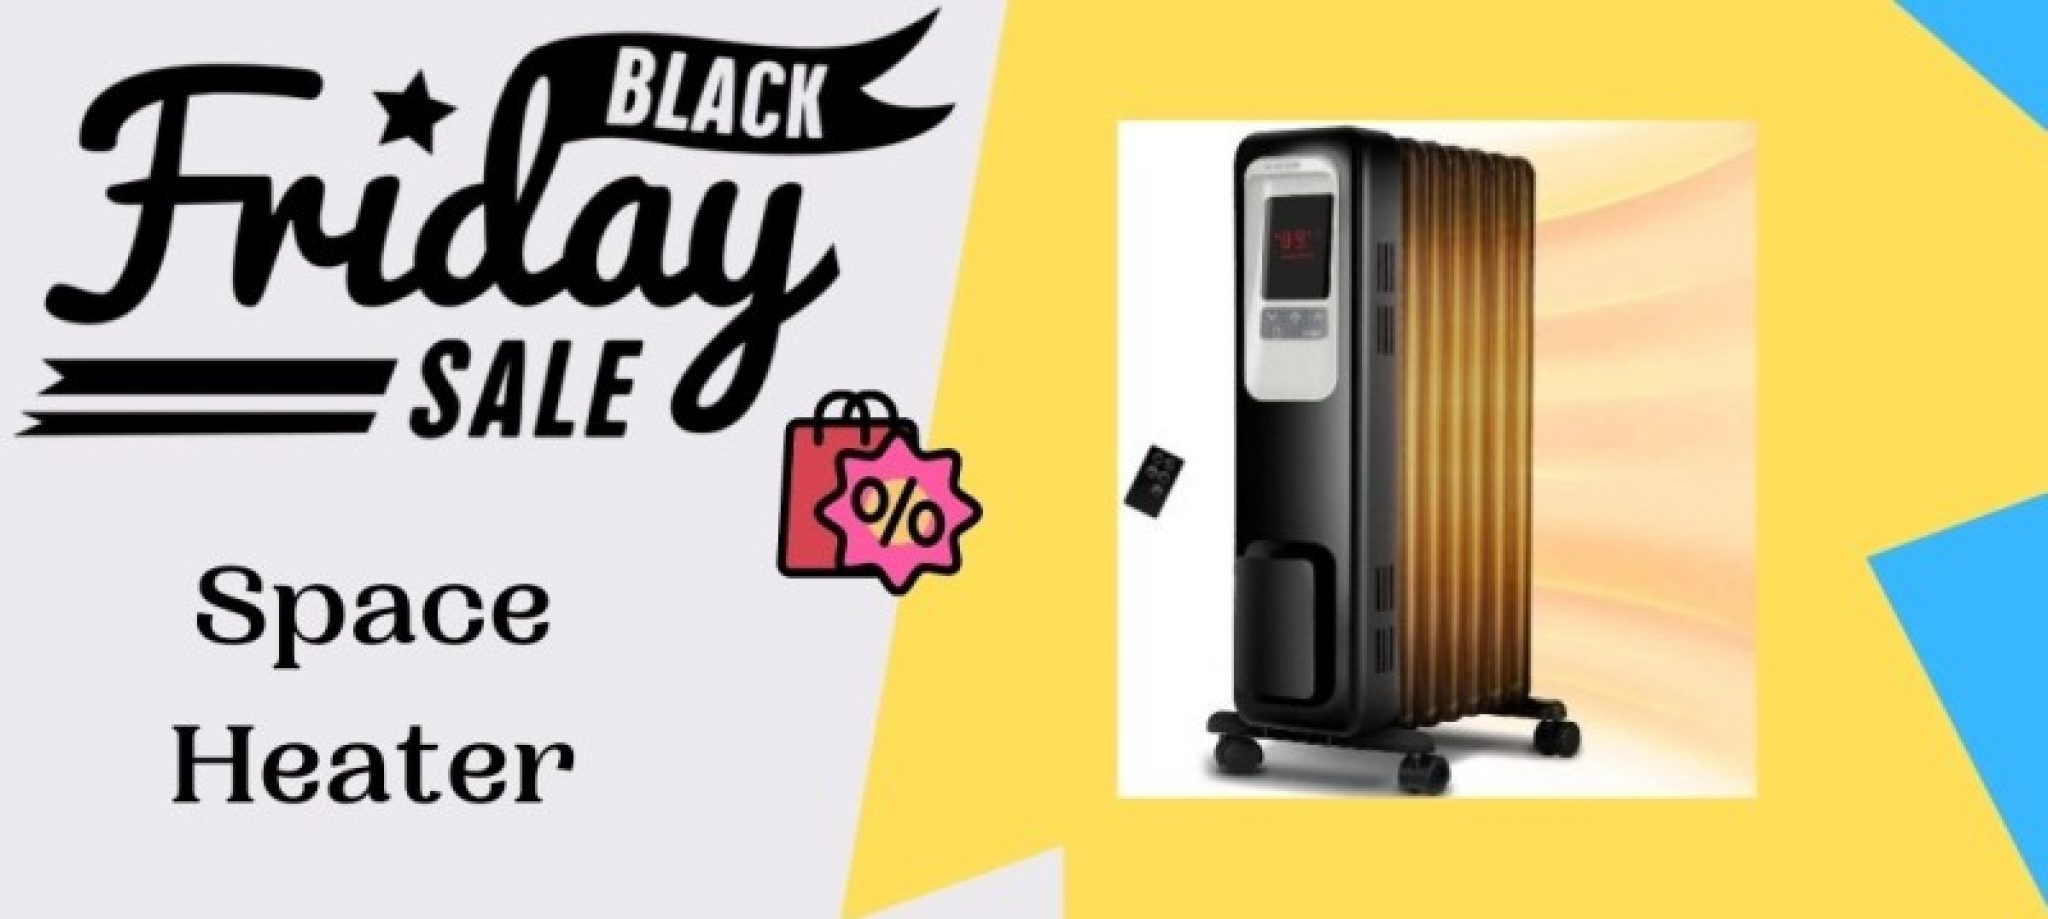 Space Heater Black Friday 2020 Deals - Up To 50% OFF - What Kind Of Deals Does Ghd Have For Black Friday